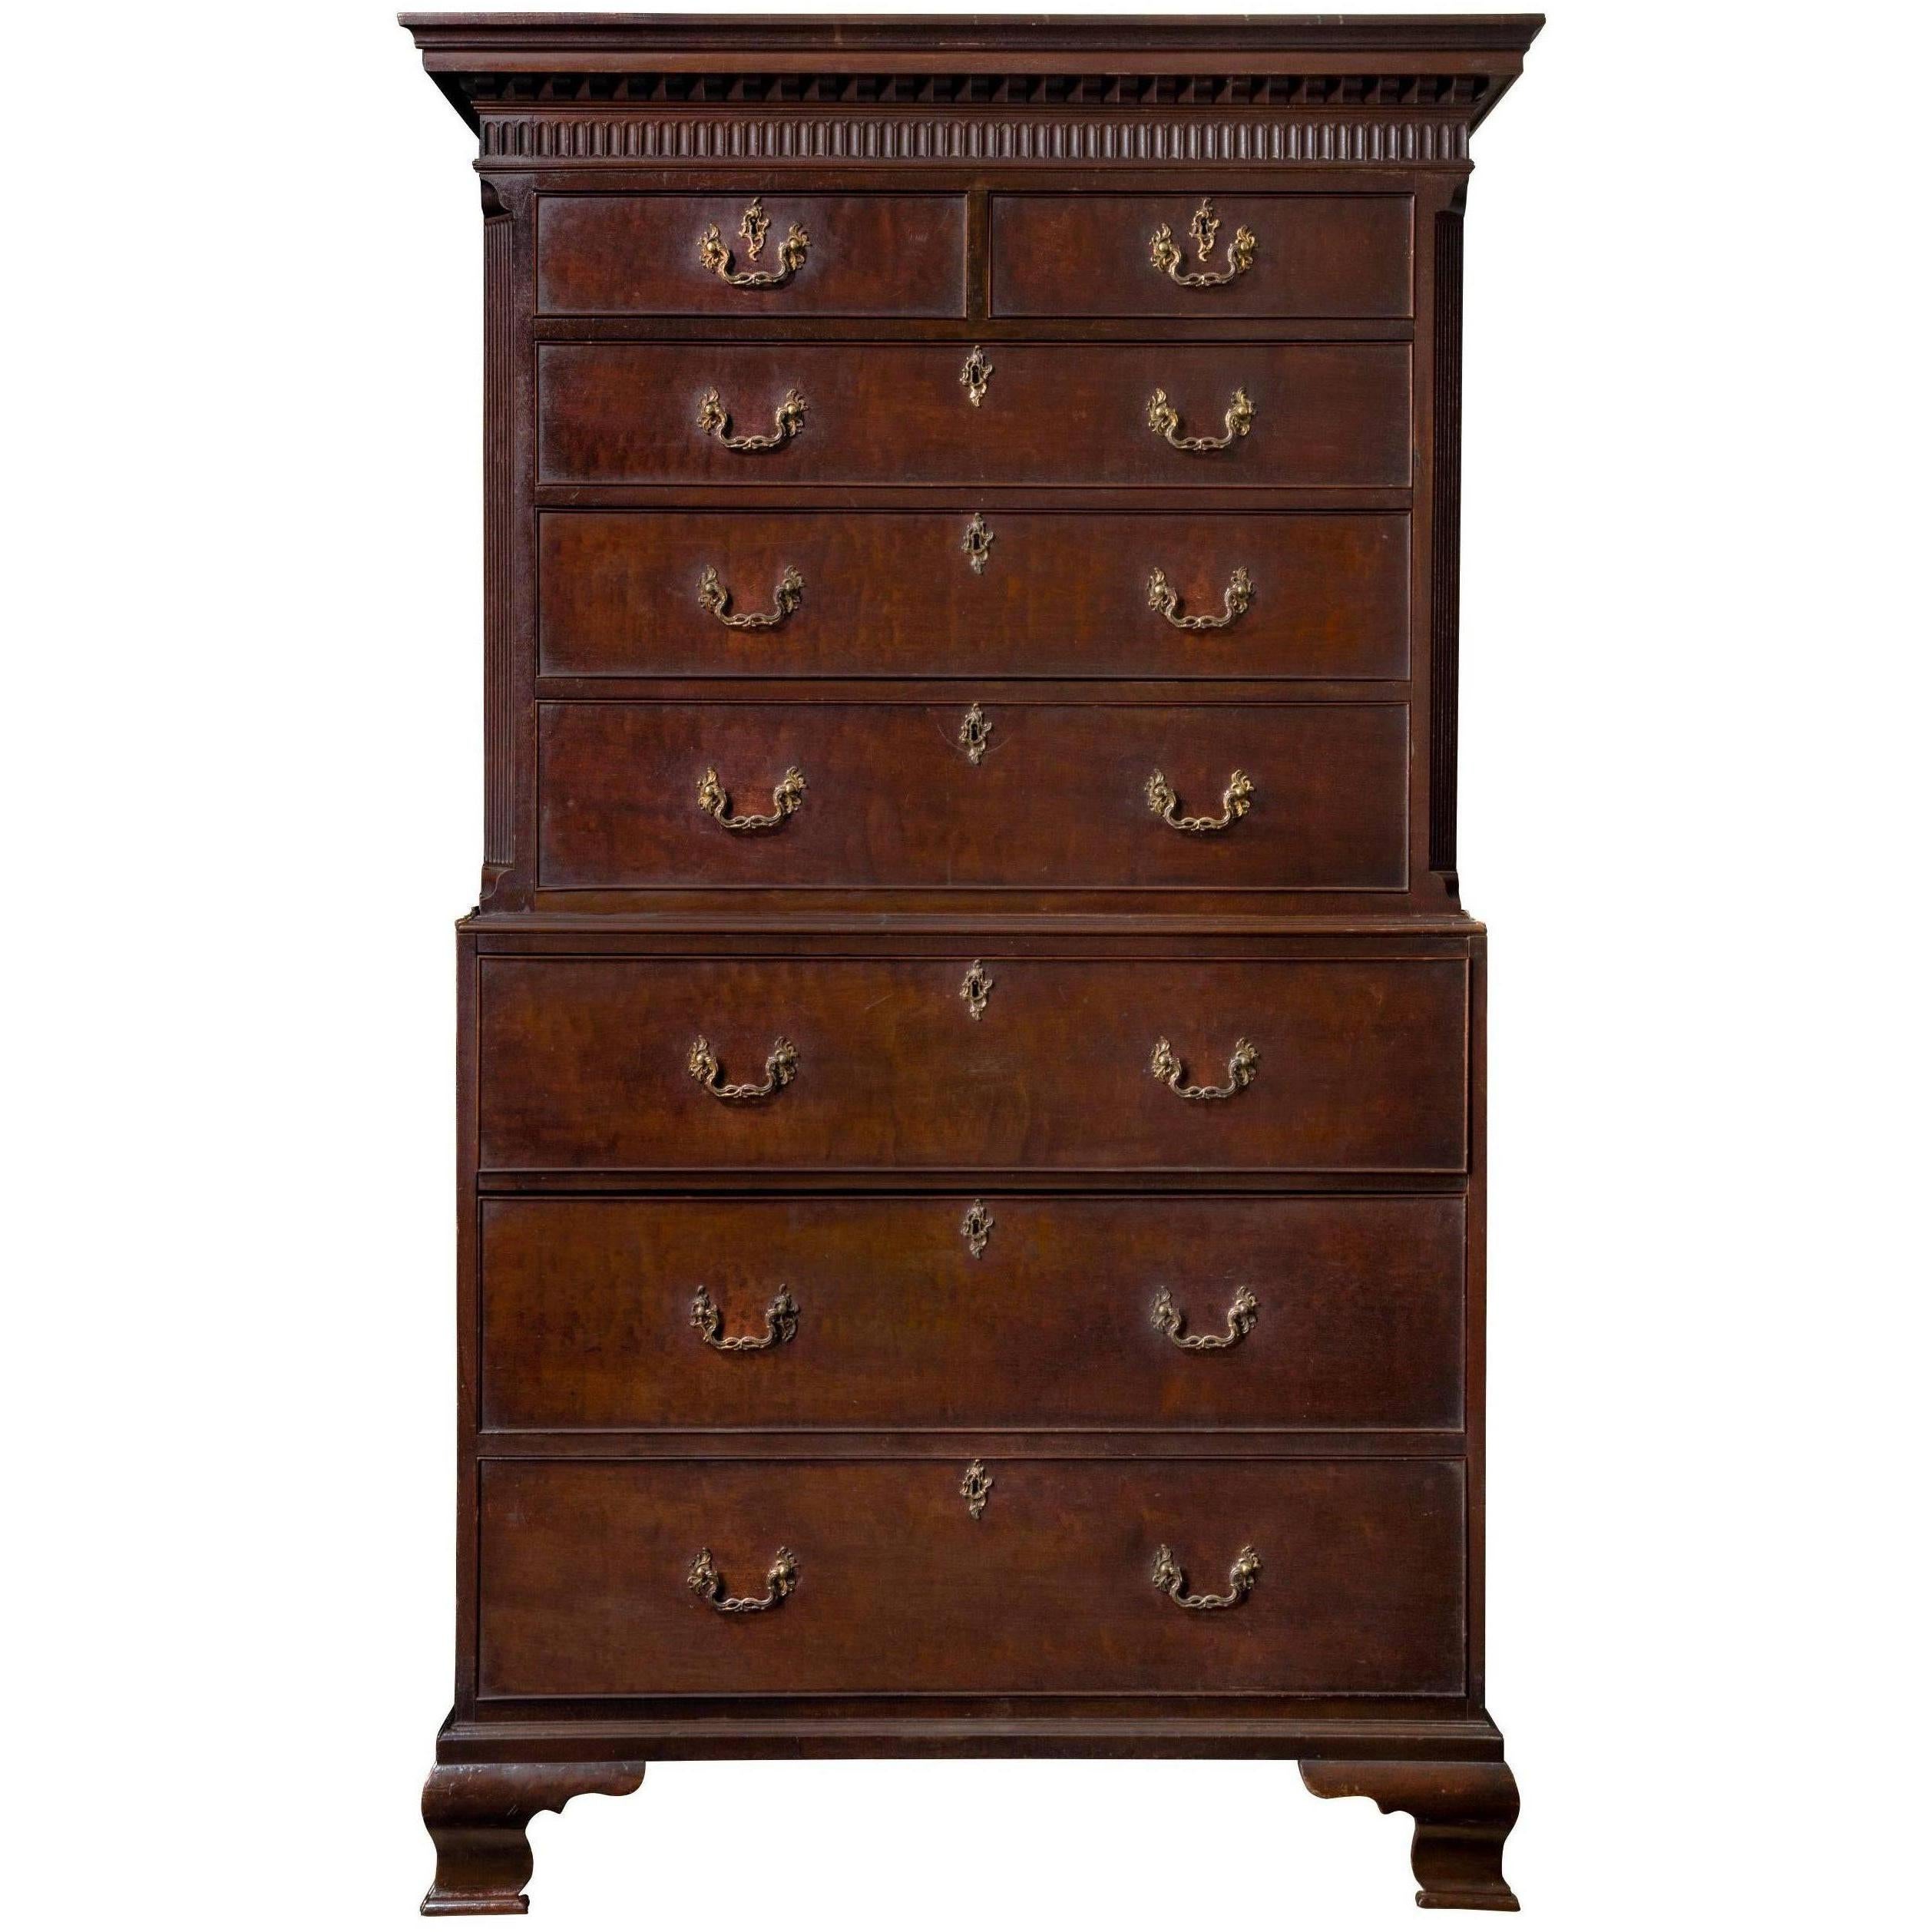 An important George II period mahogany secretaire chest on chest. The architectural form of the cornice and entablature are pure Palladian and are exquisitely executed. The top section of graduated drawers is framed by canted and fluted corners,